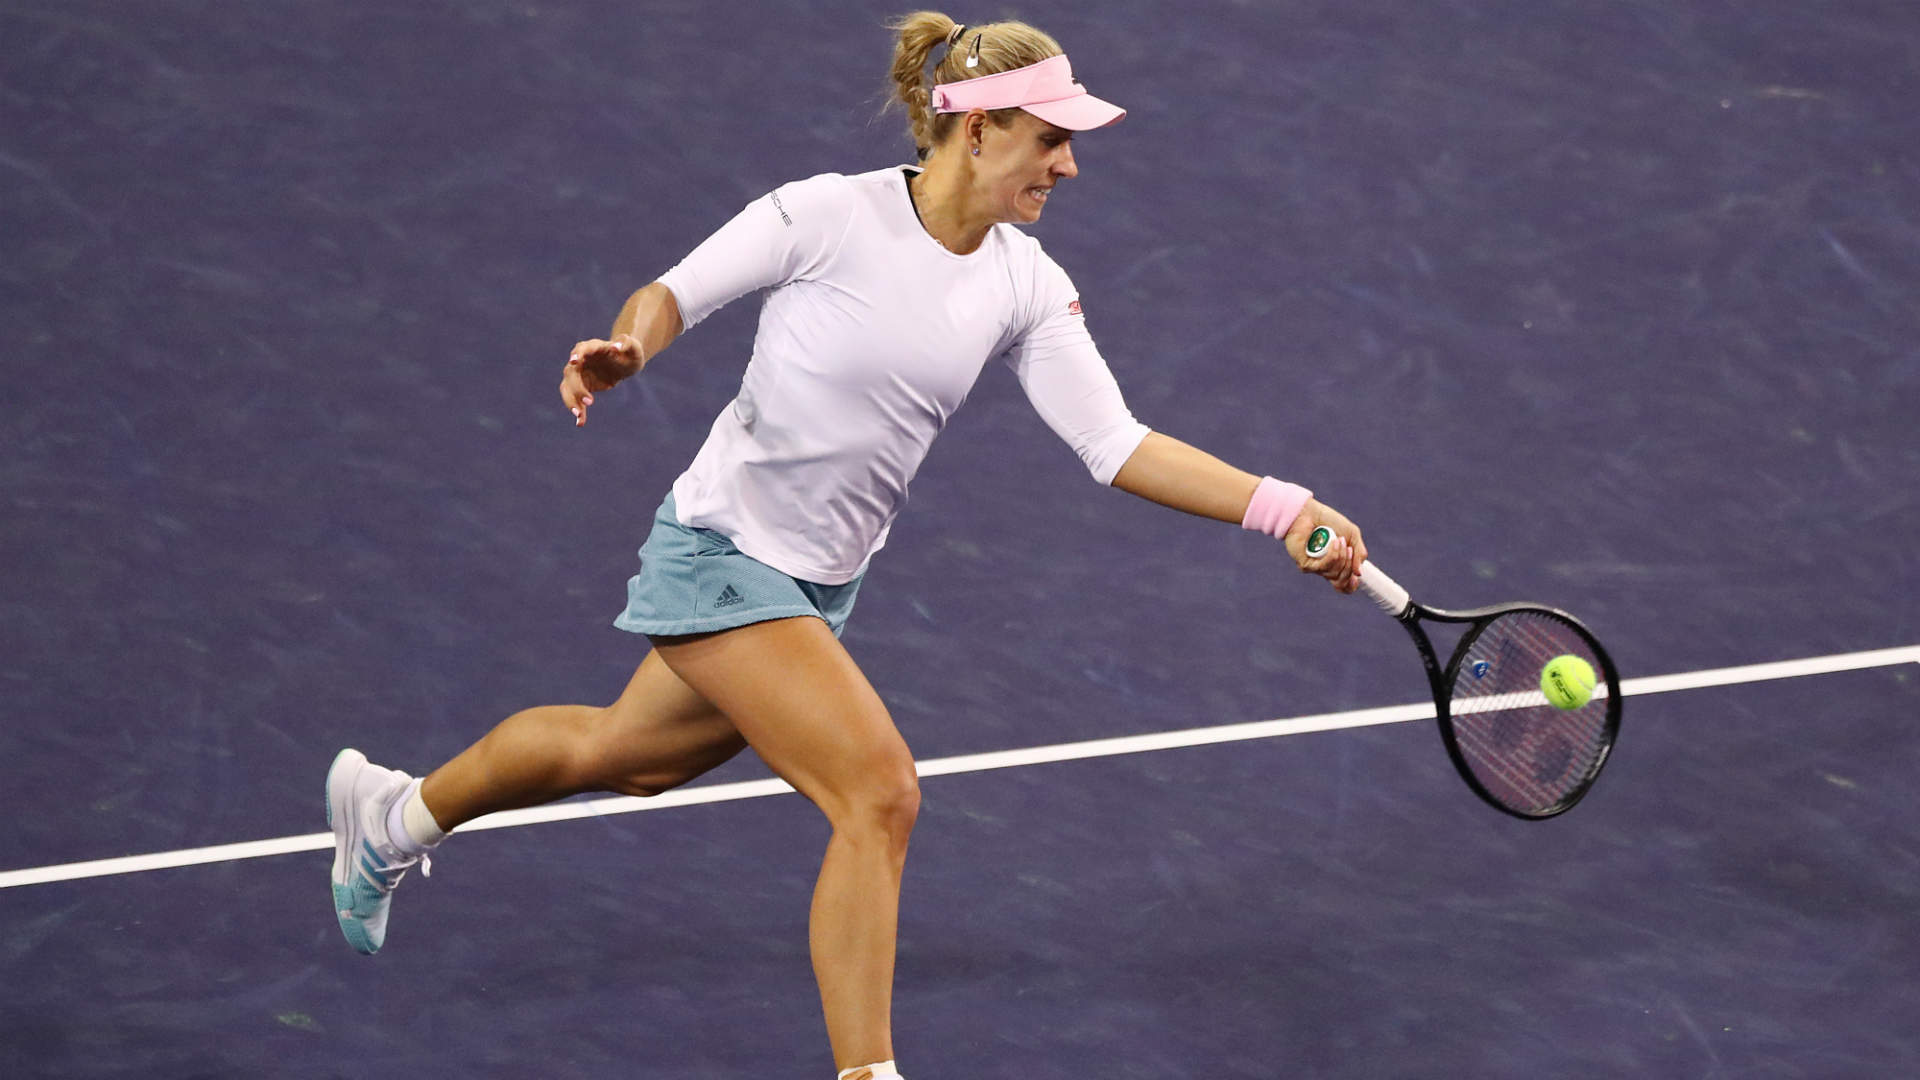 Angelique Kerber snapped Belinda Bencic's winning streak to become the first German through to the Indian Wells Open final since 1999.